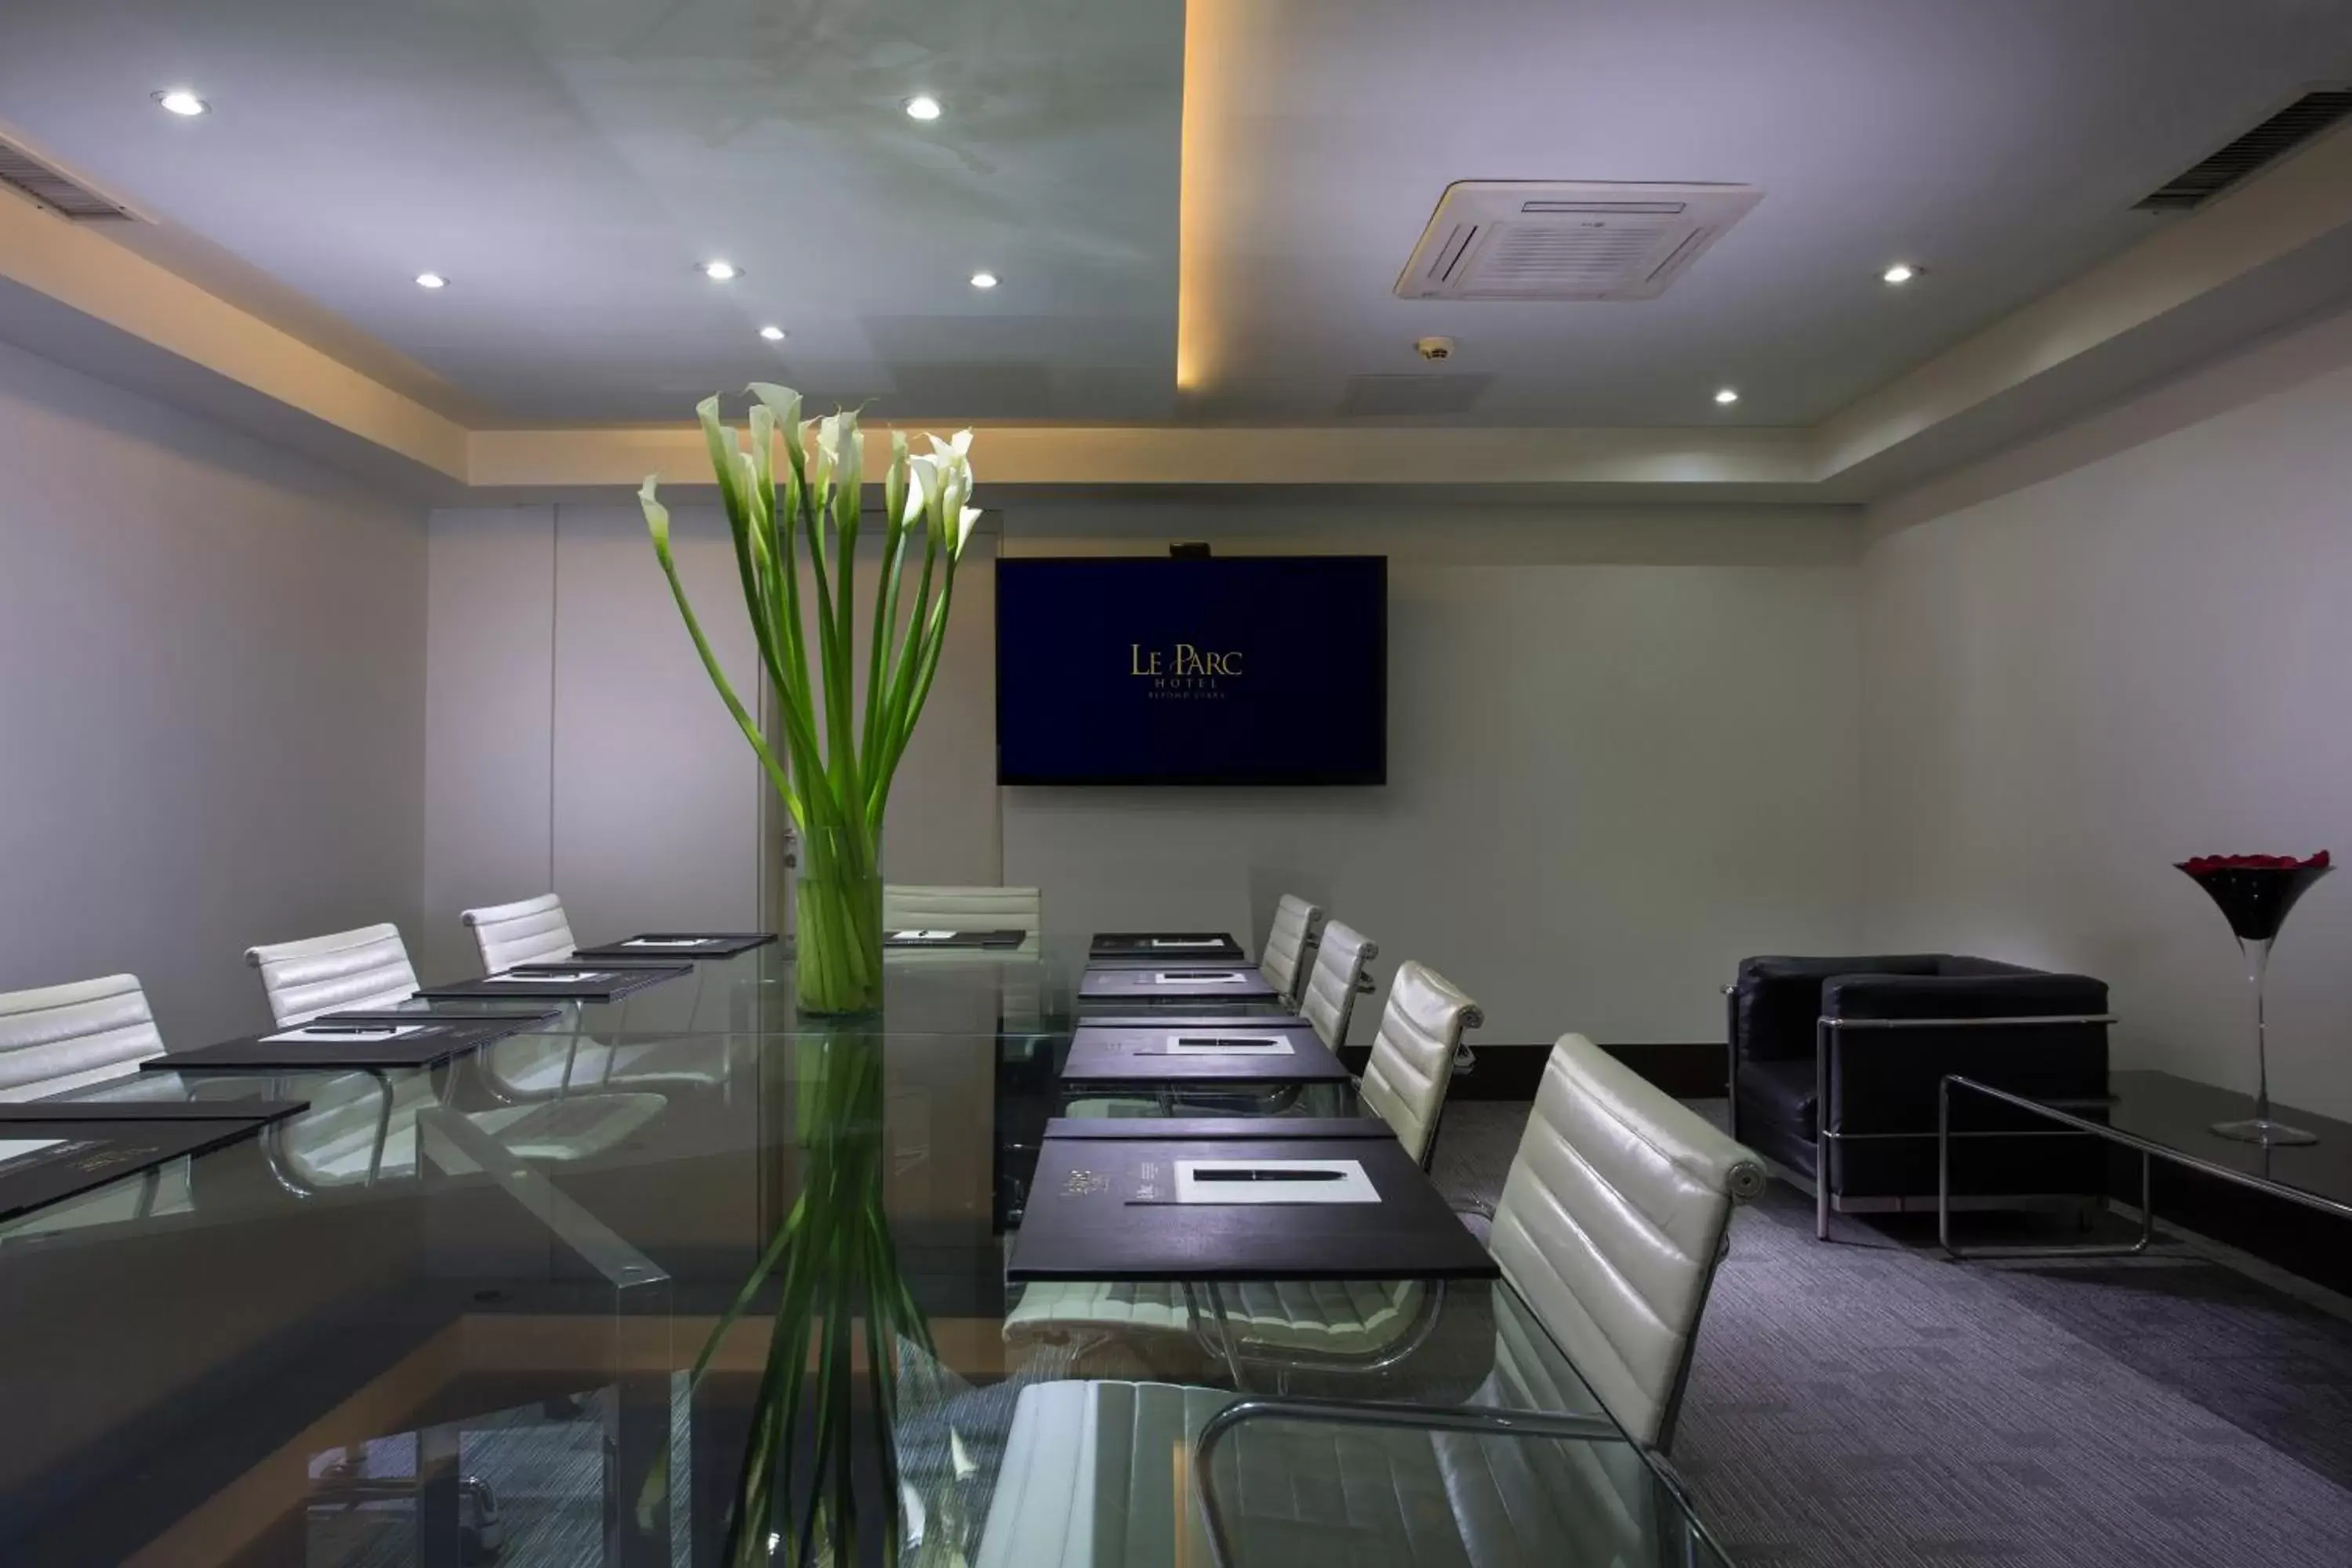 Business facilities in Le Parc Hotel, Beyond Stars